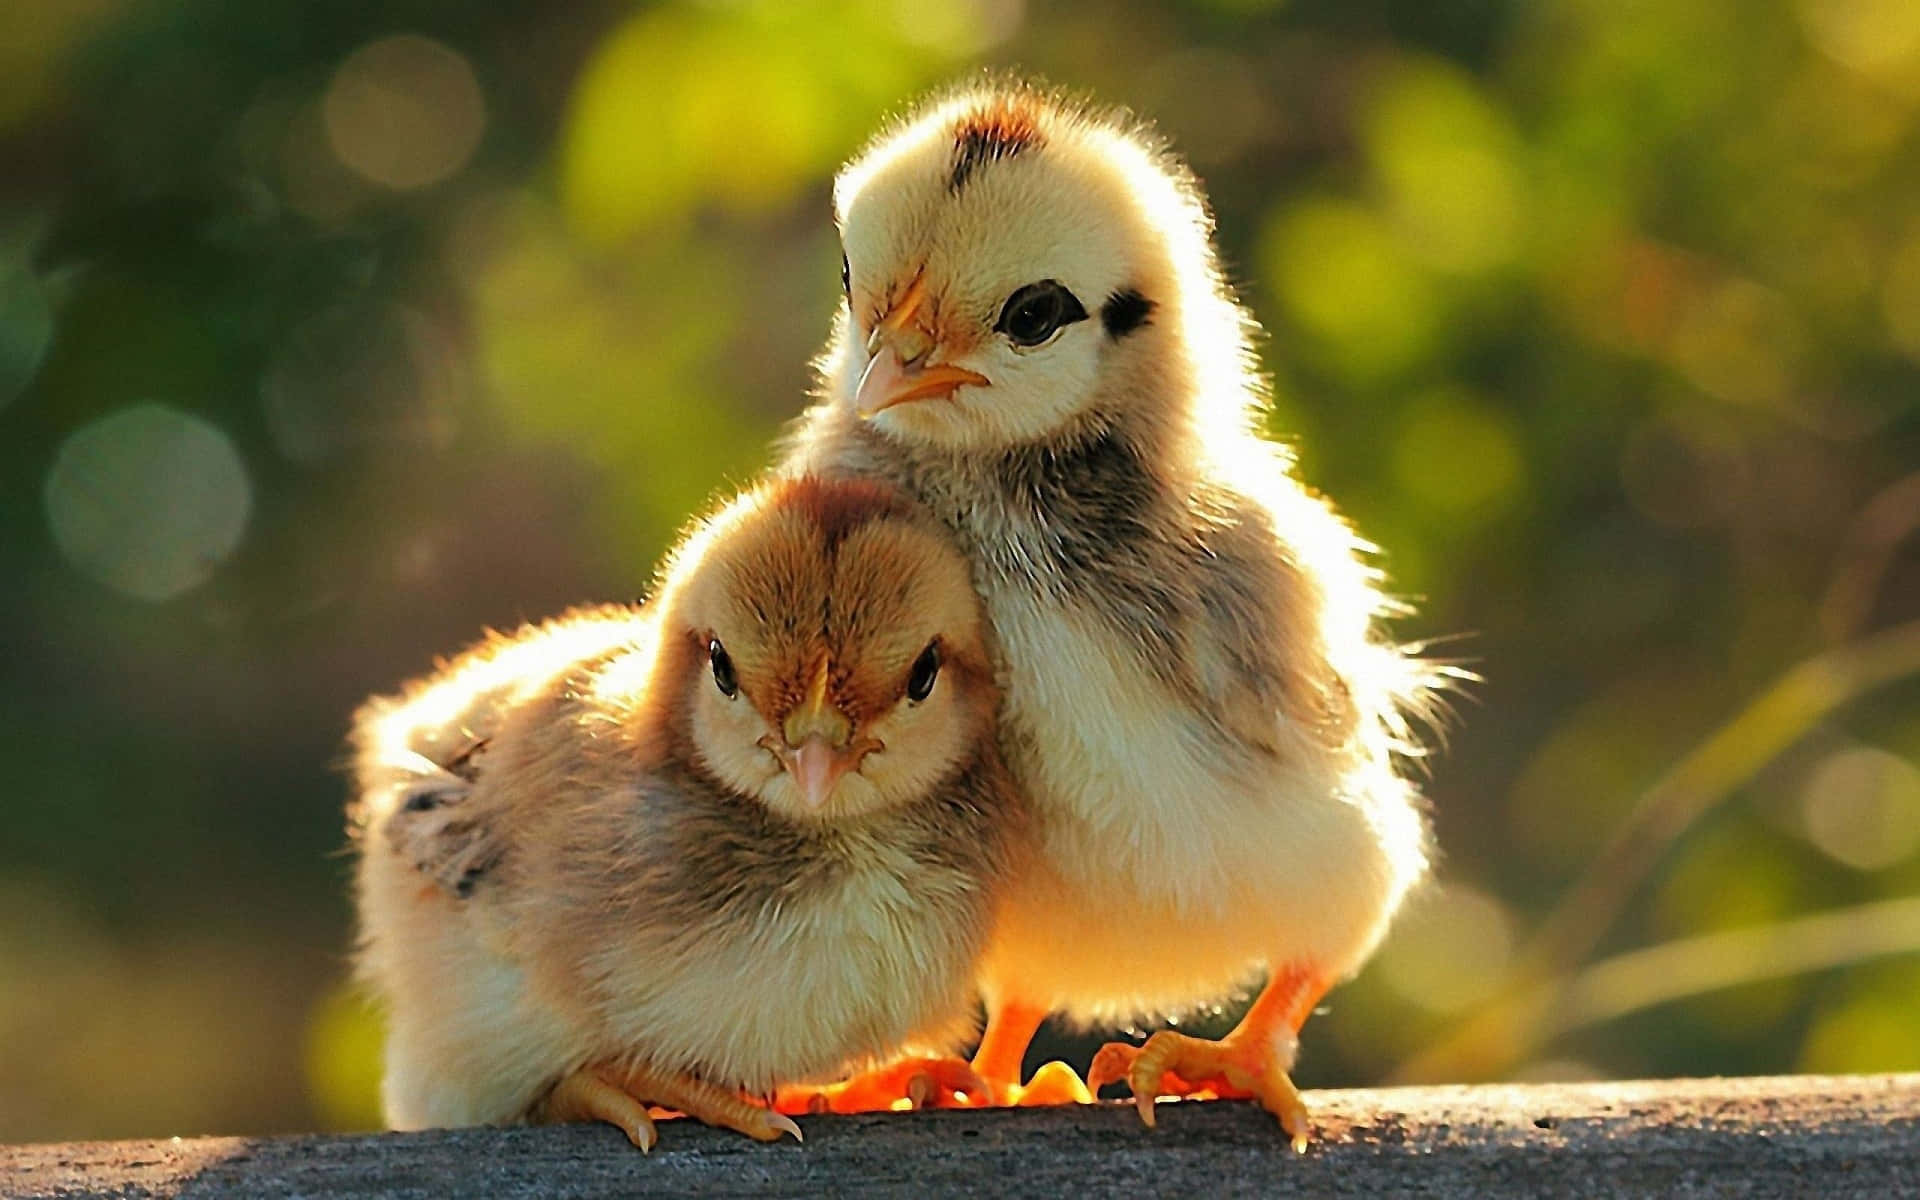 Two Small Chickens